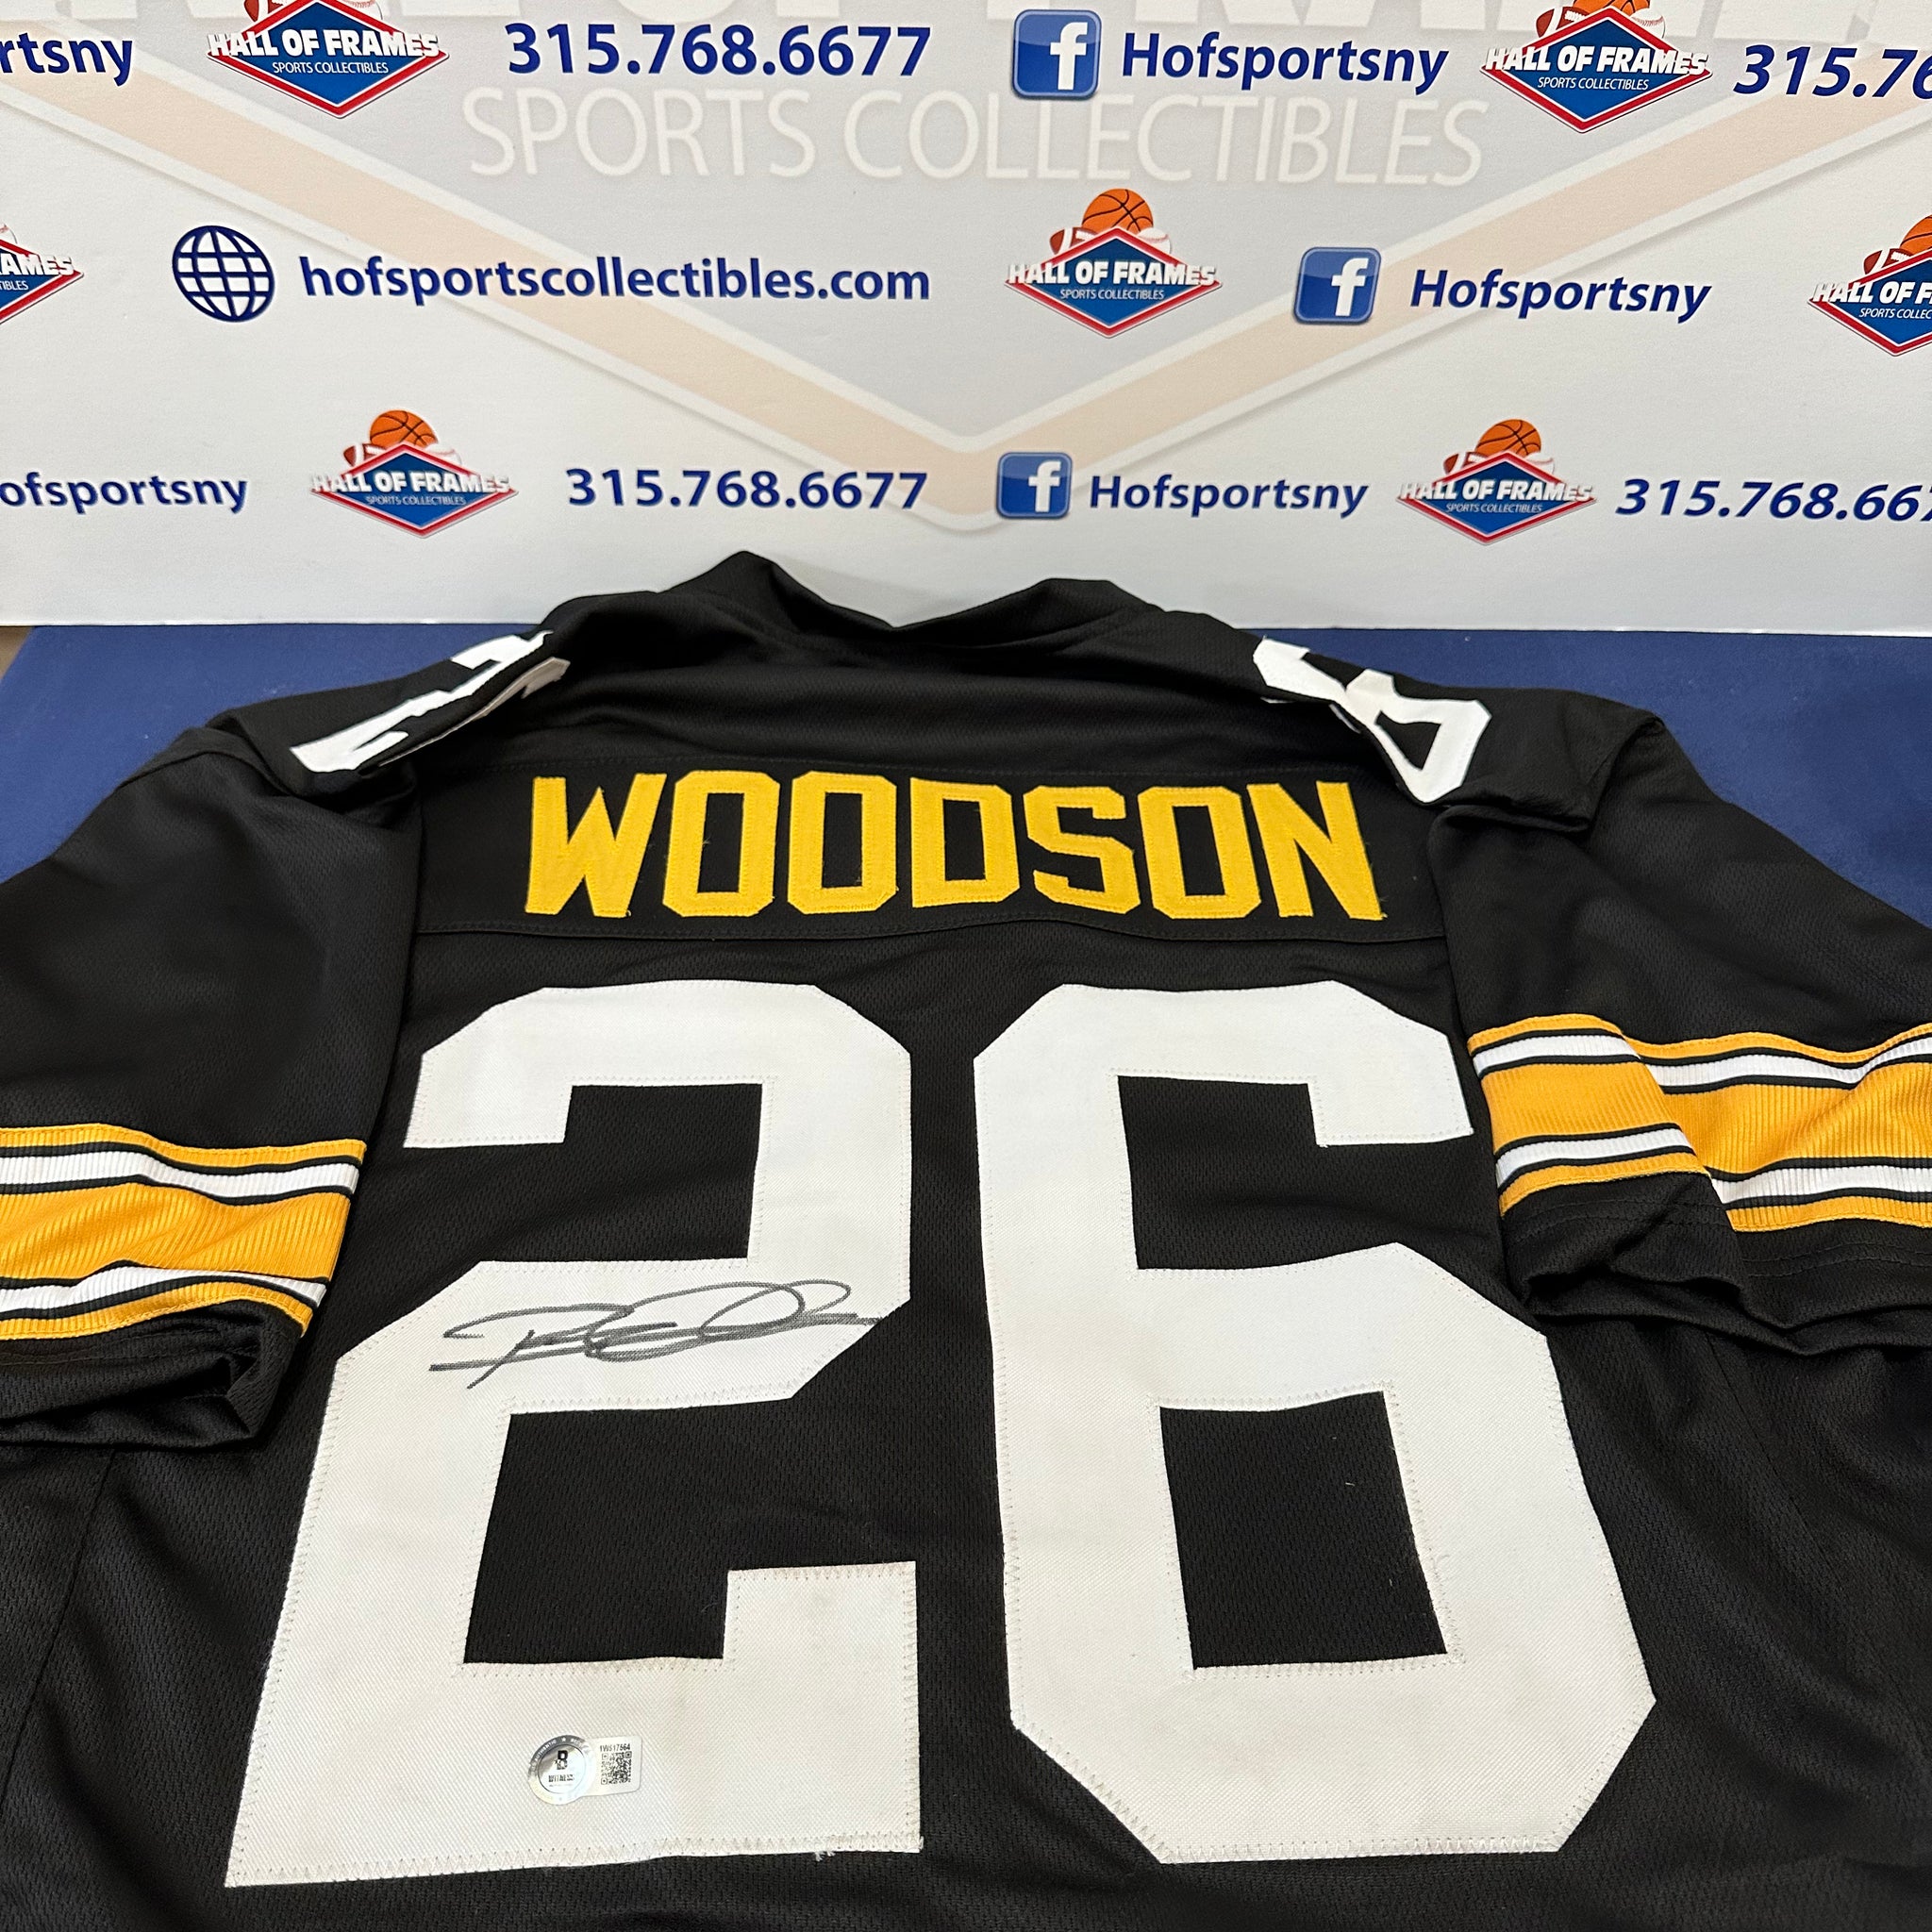 ROD WOODSON PITTSBURGH STEELERS SIGNED CUSTOM JERSEY! BAS AUTHENTIC!